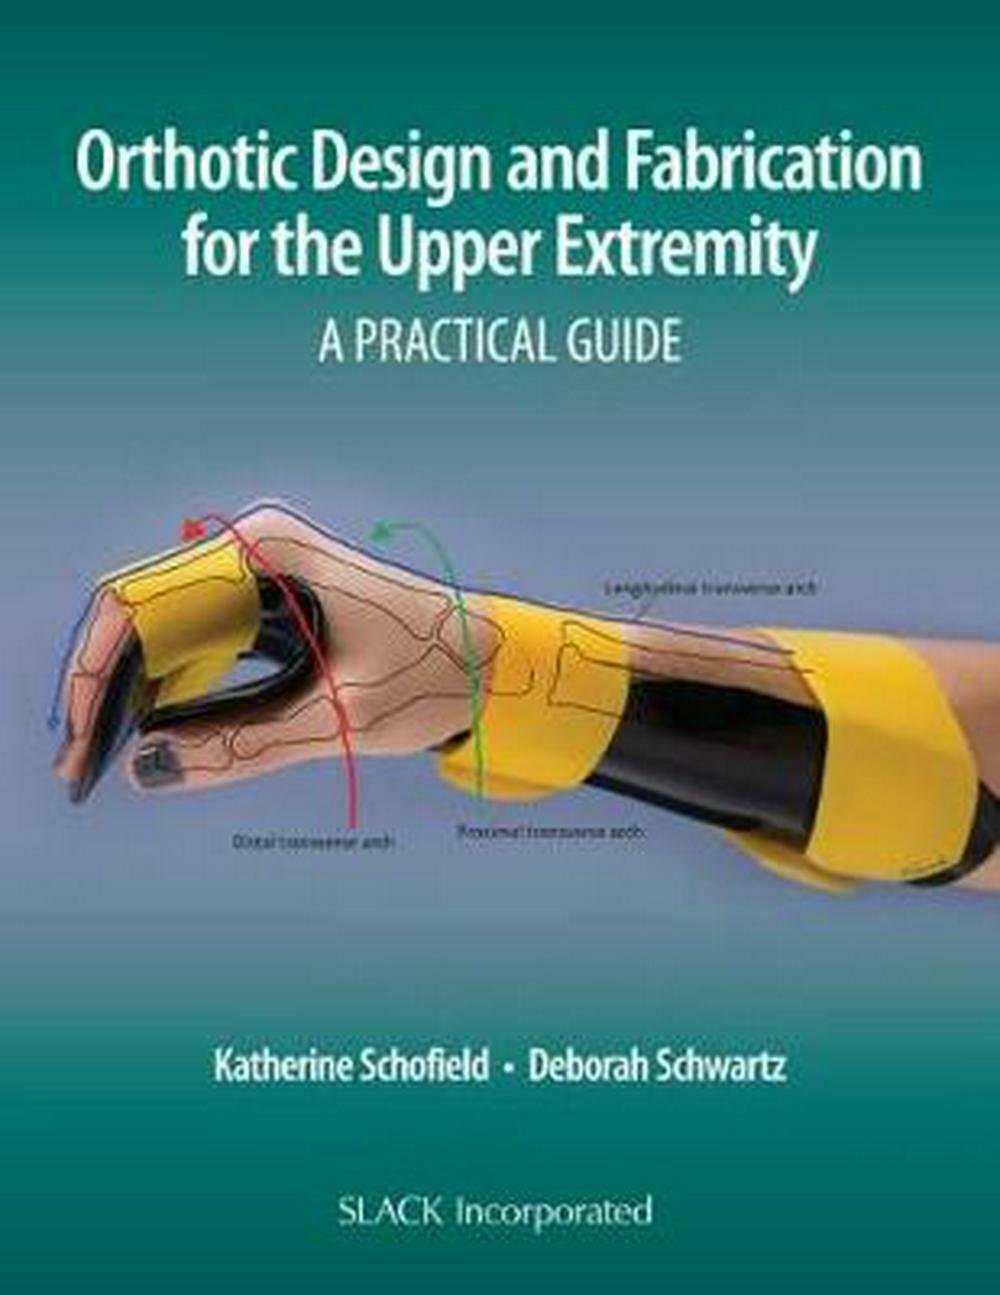 Orthotic Design and Fabrication for the Upper Extremity: A Practical Guide